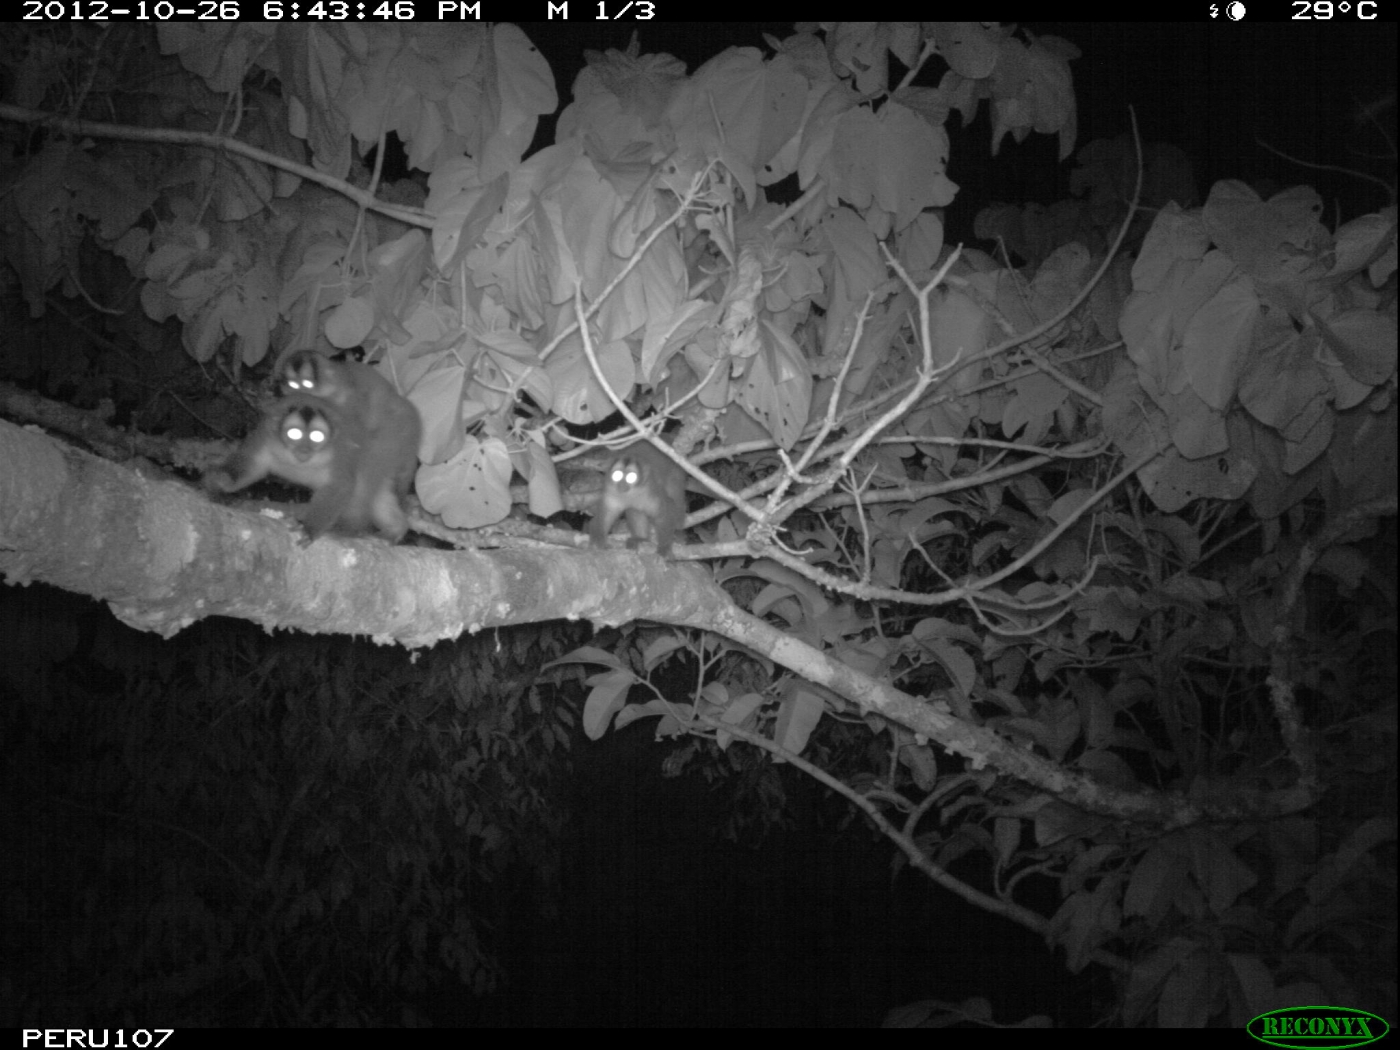 A nighttime camera trap photo of a group of small monkeys crossing a branch high up in the treetops of Peru's tropical rainforest. The monkey in the lead carries its small baby on its back.